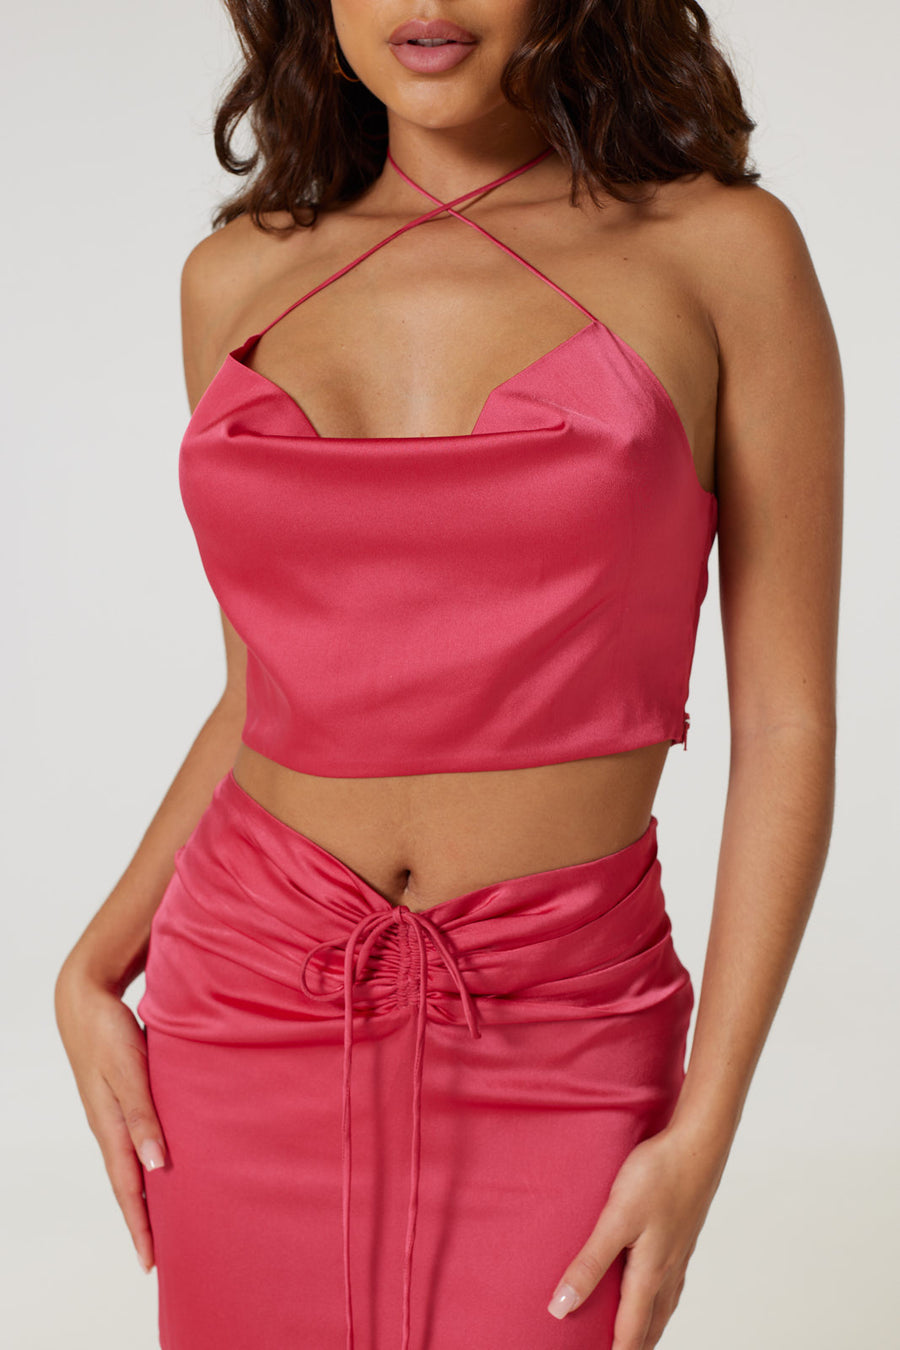 Lili Skirt in Recycled Satin in Hot Pink